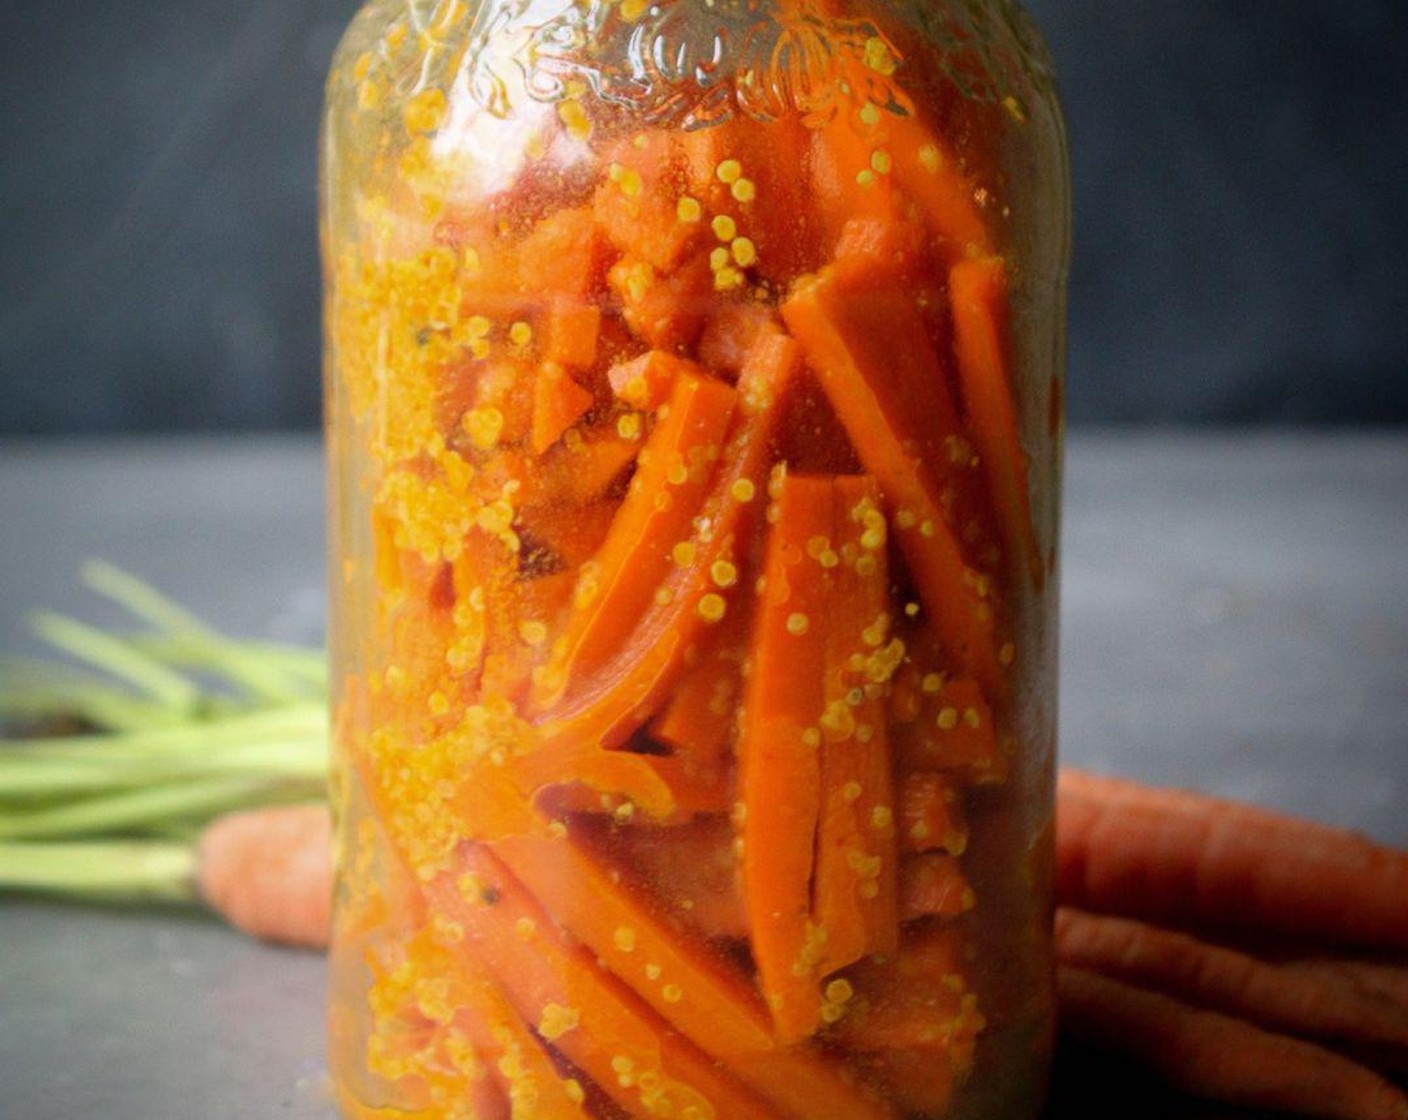 step 6 Place the carrot sticks into a jar with a lid. Give it a gentle shake and refrigerate overnight. They will stay in the refrigerator for up to 2 weeks.